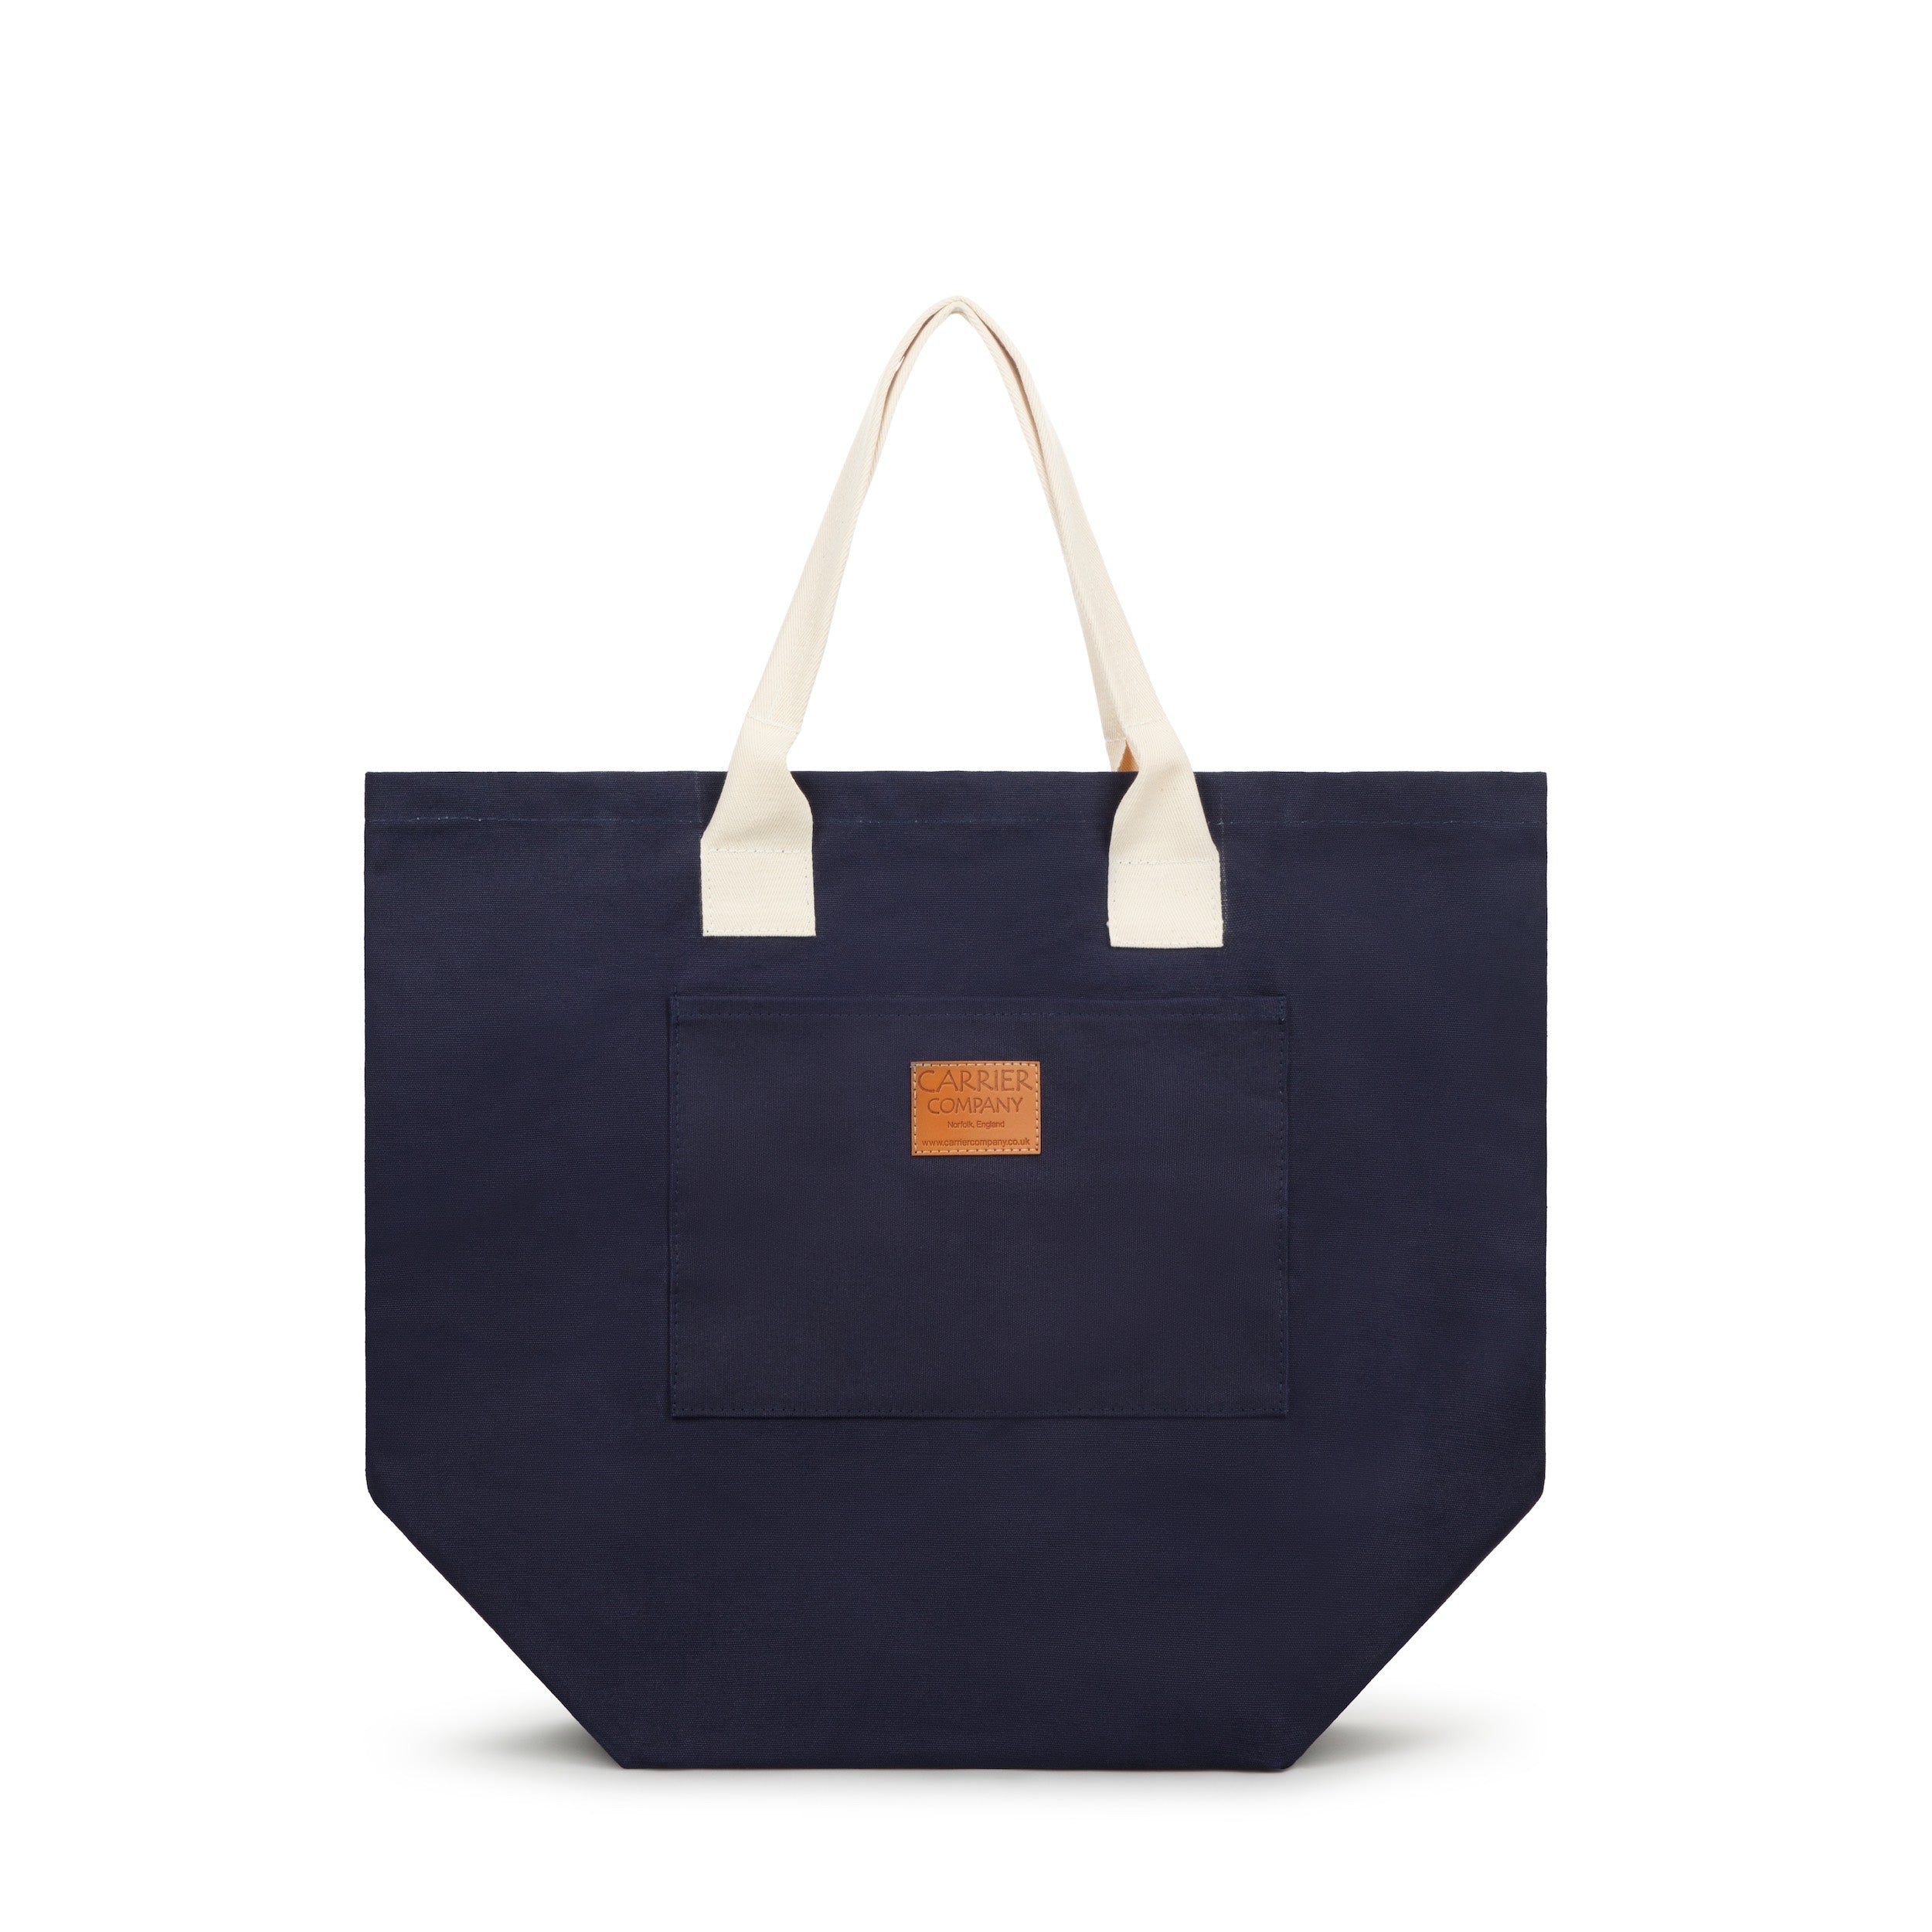 Carrier Company White Handled Beach Bag in Navy